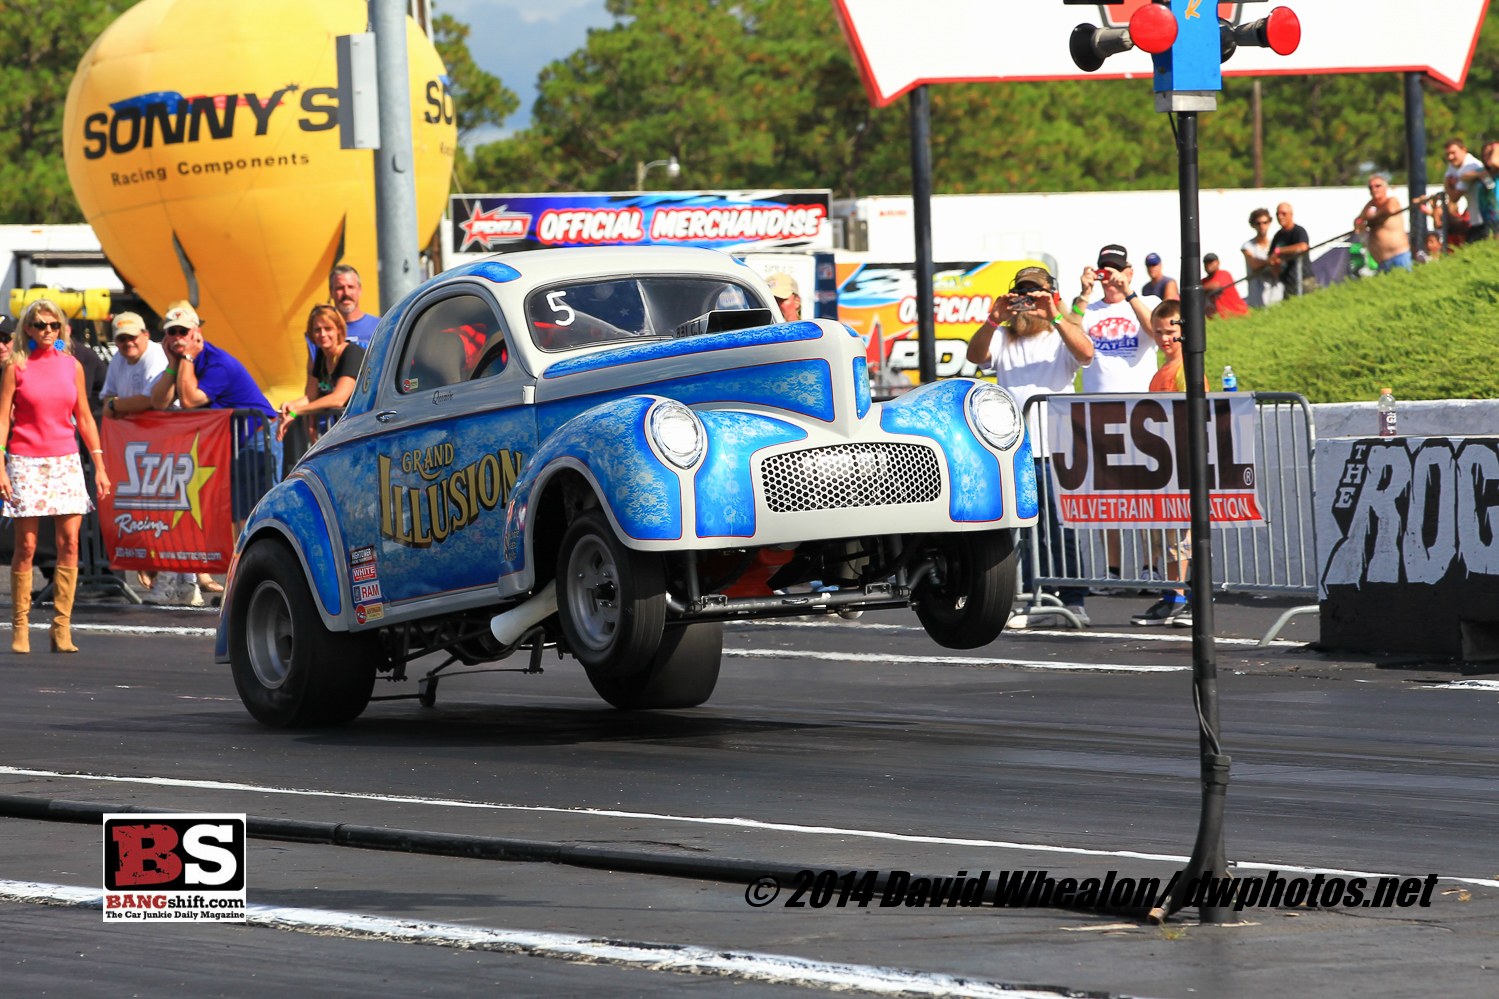 Southeast Gasser Association Action Gallery From PDRA Rockingham – Quain Stott’s Period Correct Gasser Group Rules